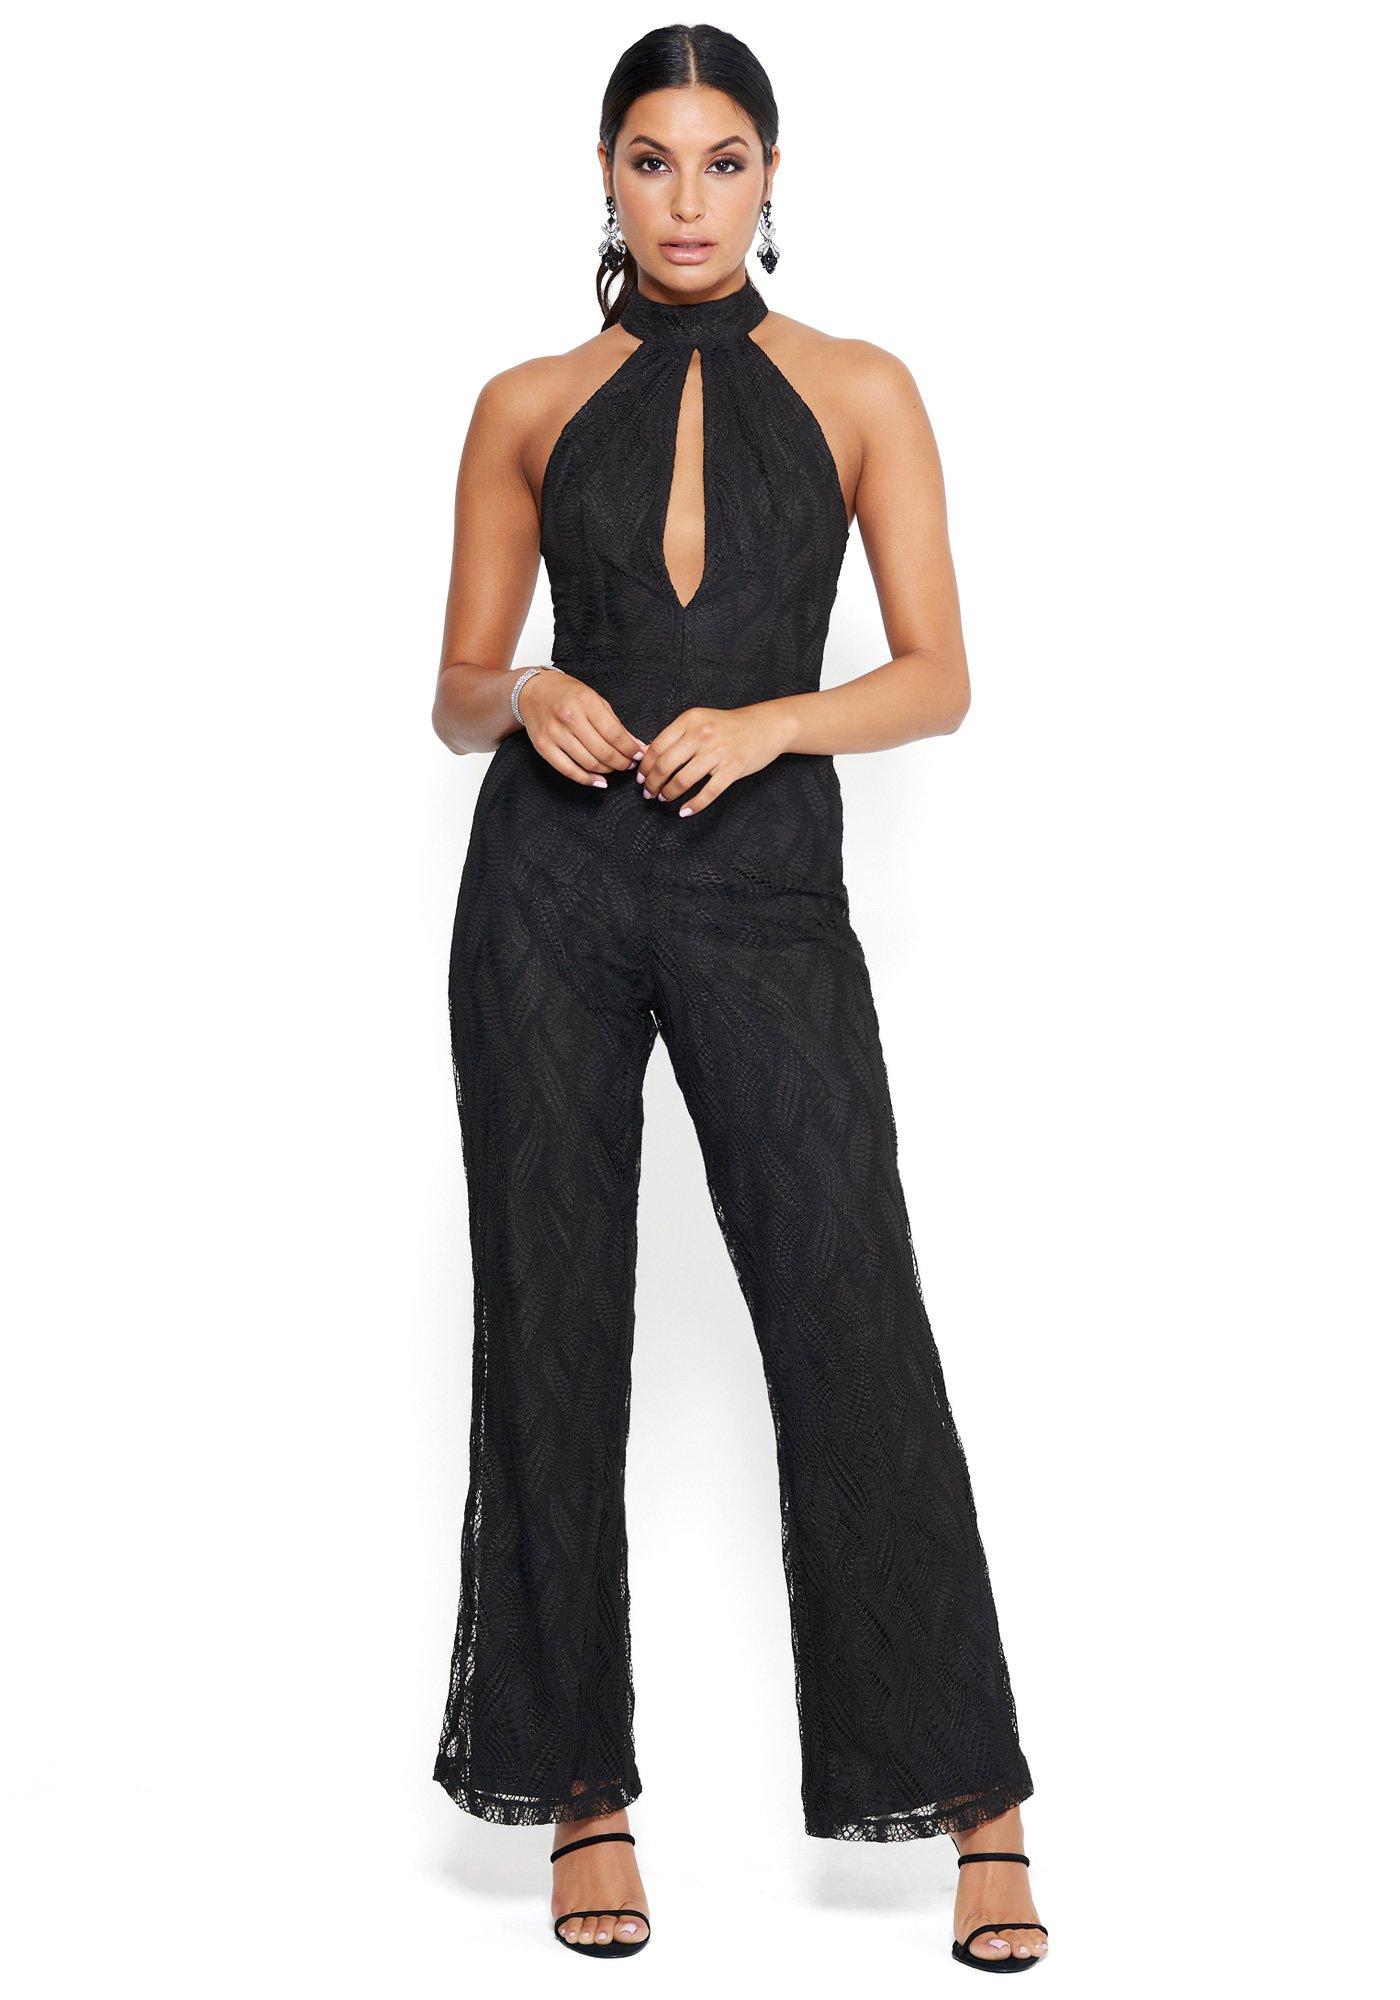 Bebe Embroidered Lace Jumpsuit in Black - Lyst